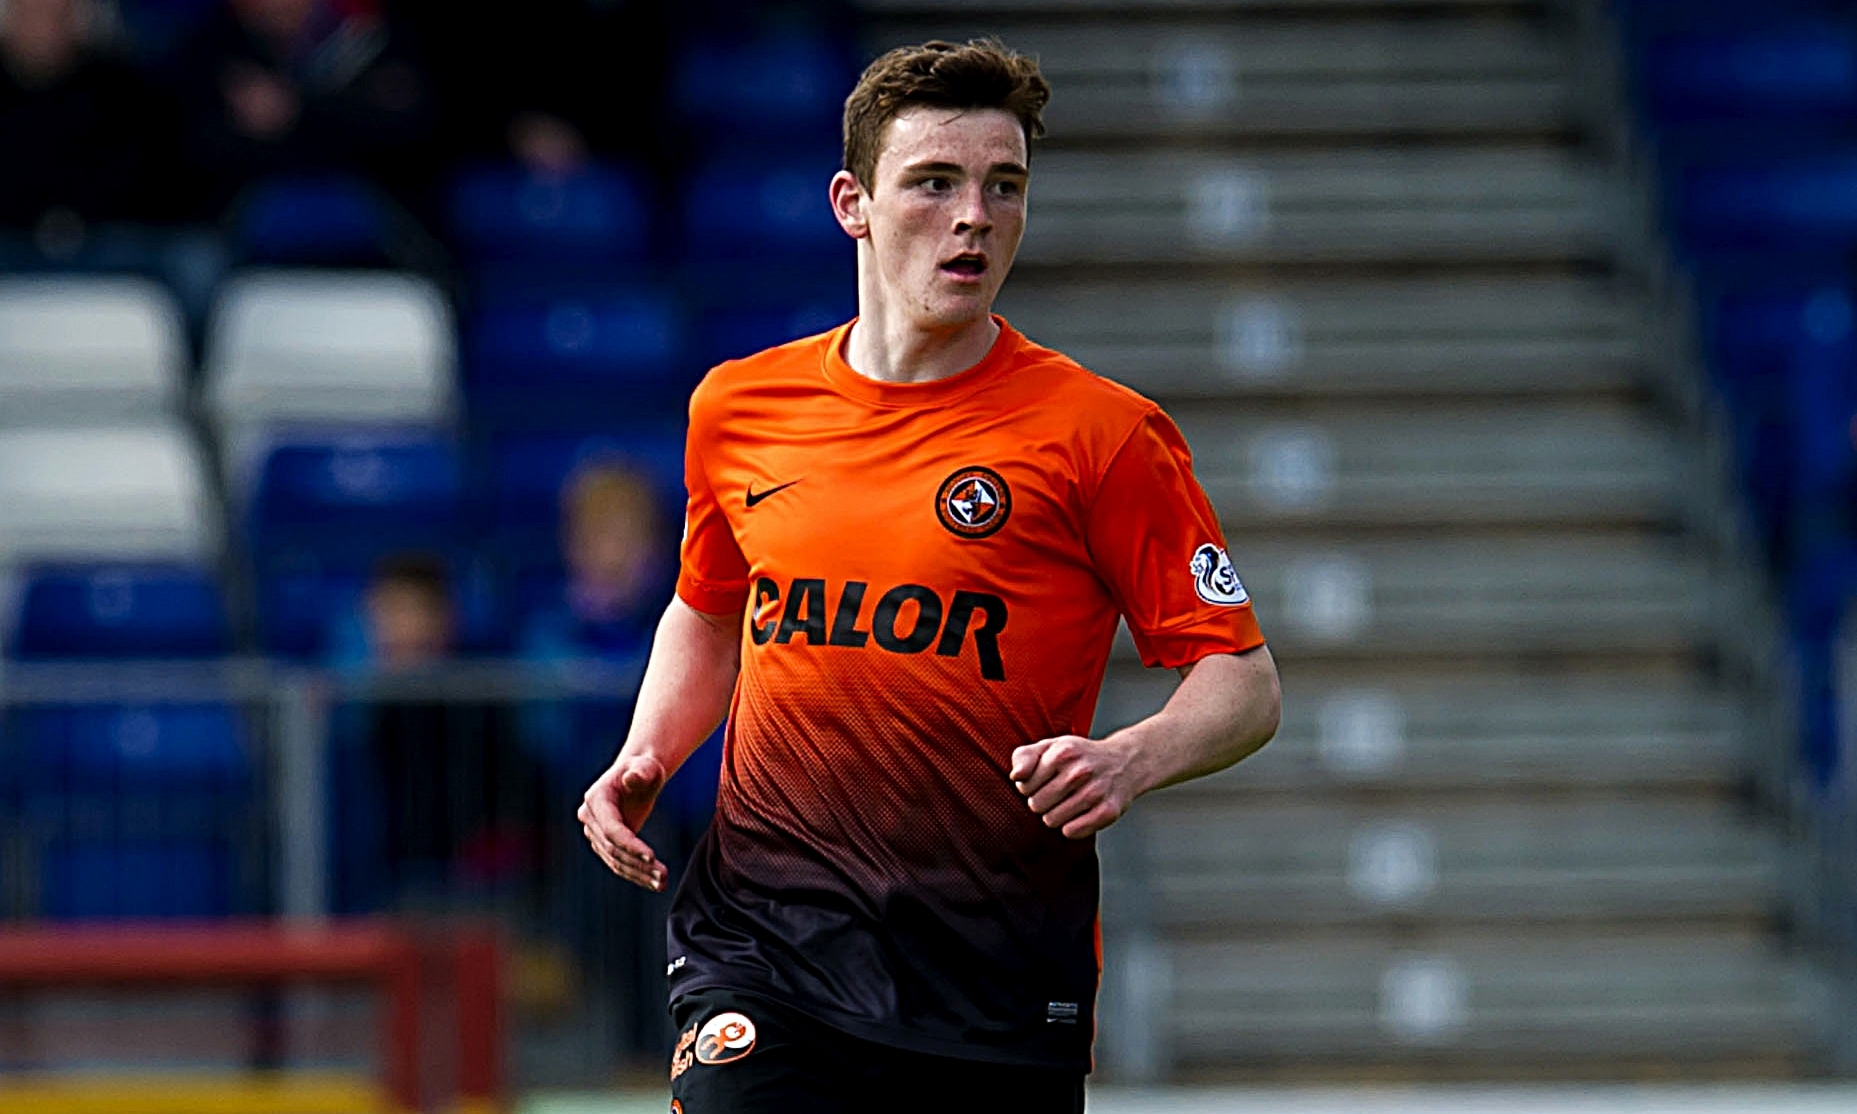 03/05/14 SCOTTISH PREMIERSHIP
ICT v DUNDEE UTD (1-1)
TULLOCH CALEDONIAN STADIUM - INVERNESS
Andrew Robertson in action for Dundee United